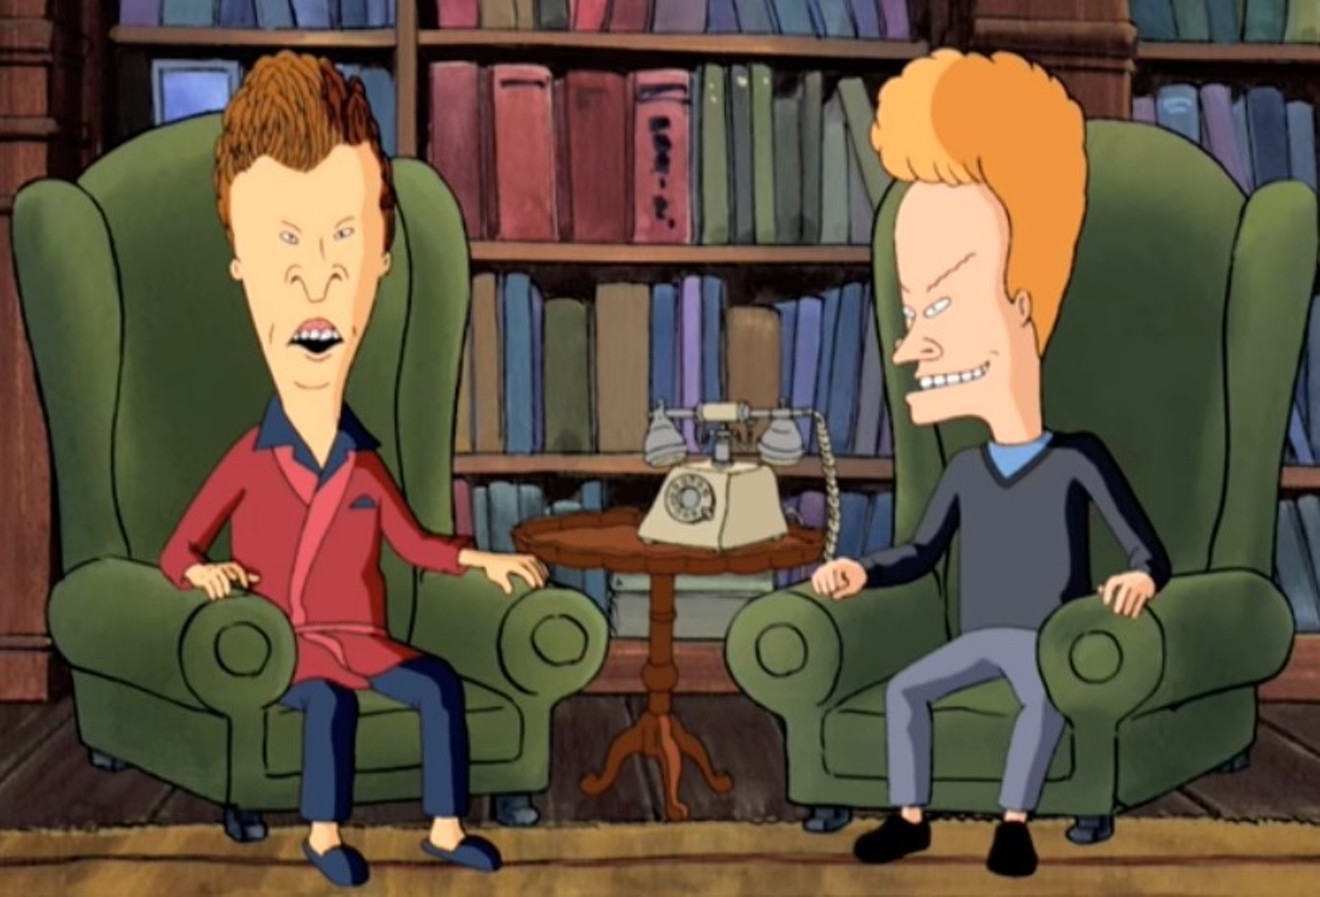 TV producer, writer and animator Mike Judge first created the moronic cartoon zeitgeist while he lived in Dallas as a struggling animator. Beavis and Butt-head will make its third television run next year on Comedy Central.